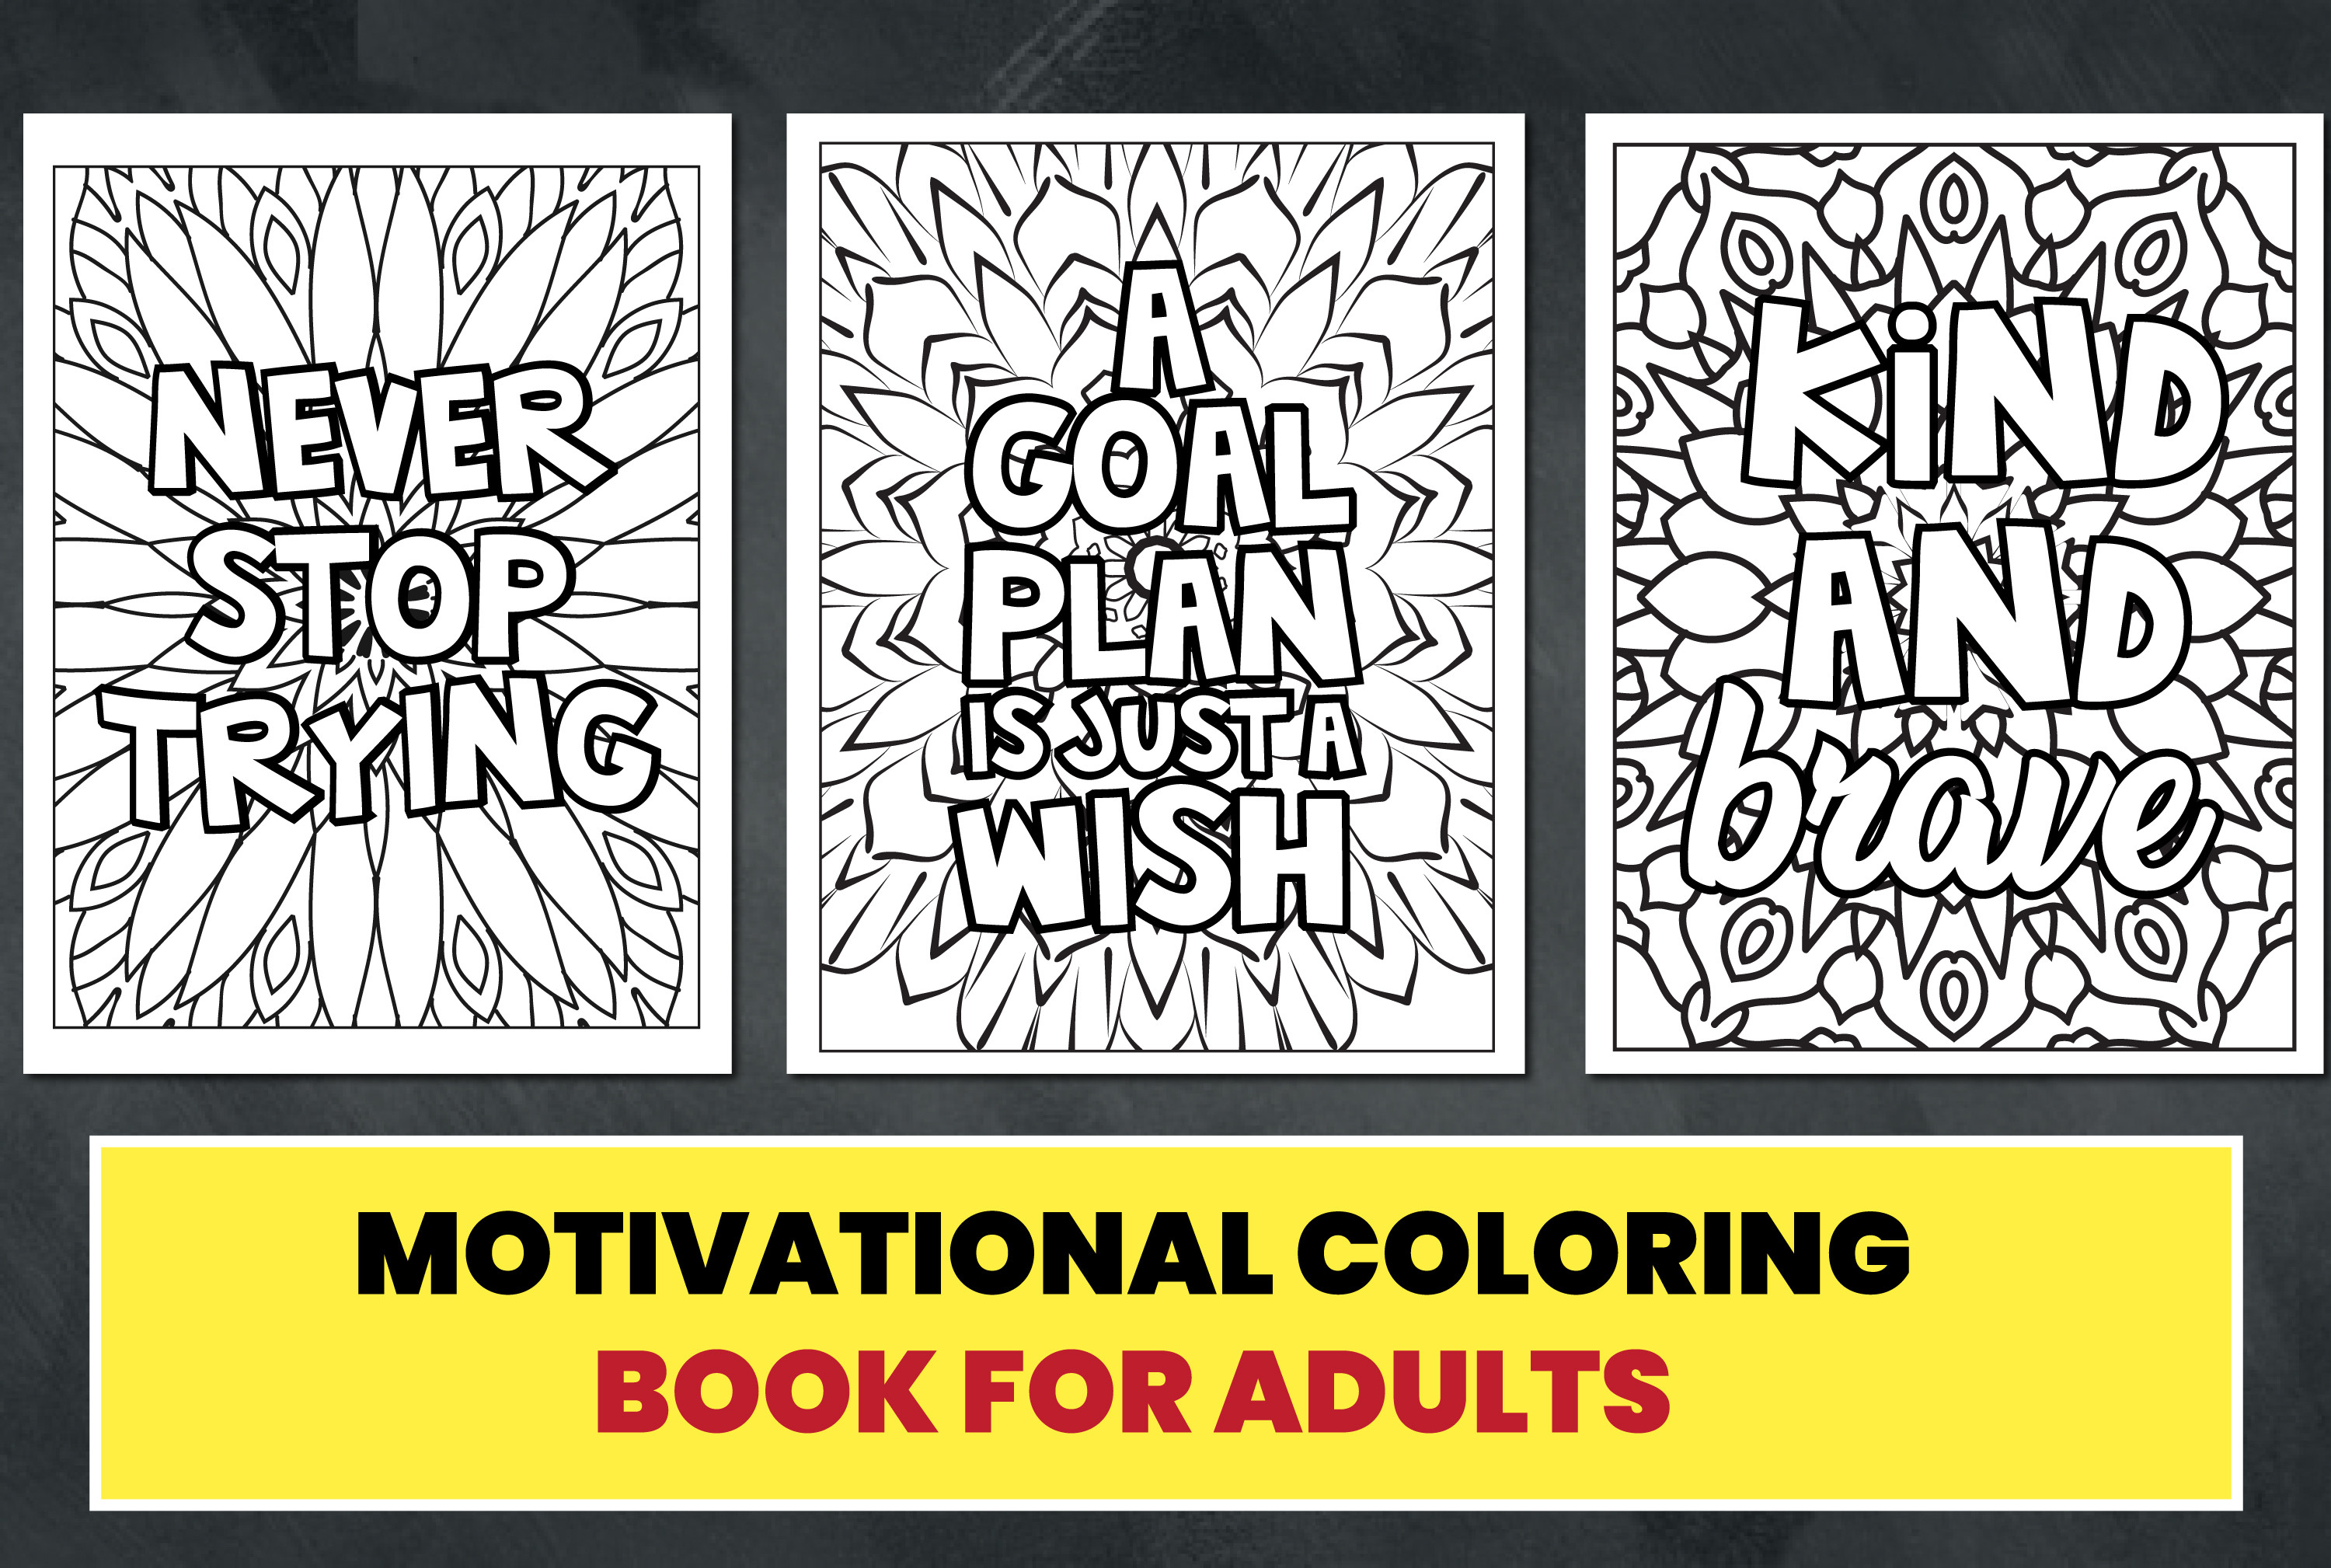 Motivational Coloring Book for Adults Gr Graphic by ietypoofficial ...